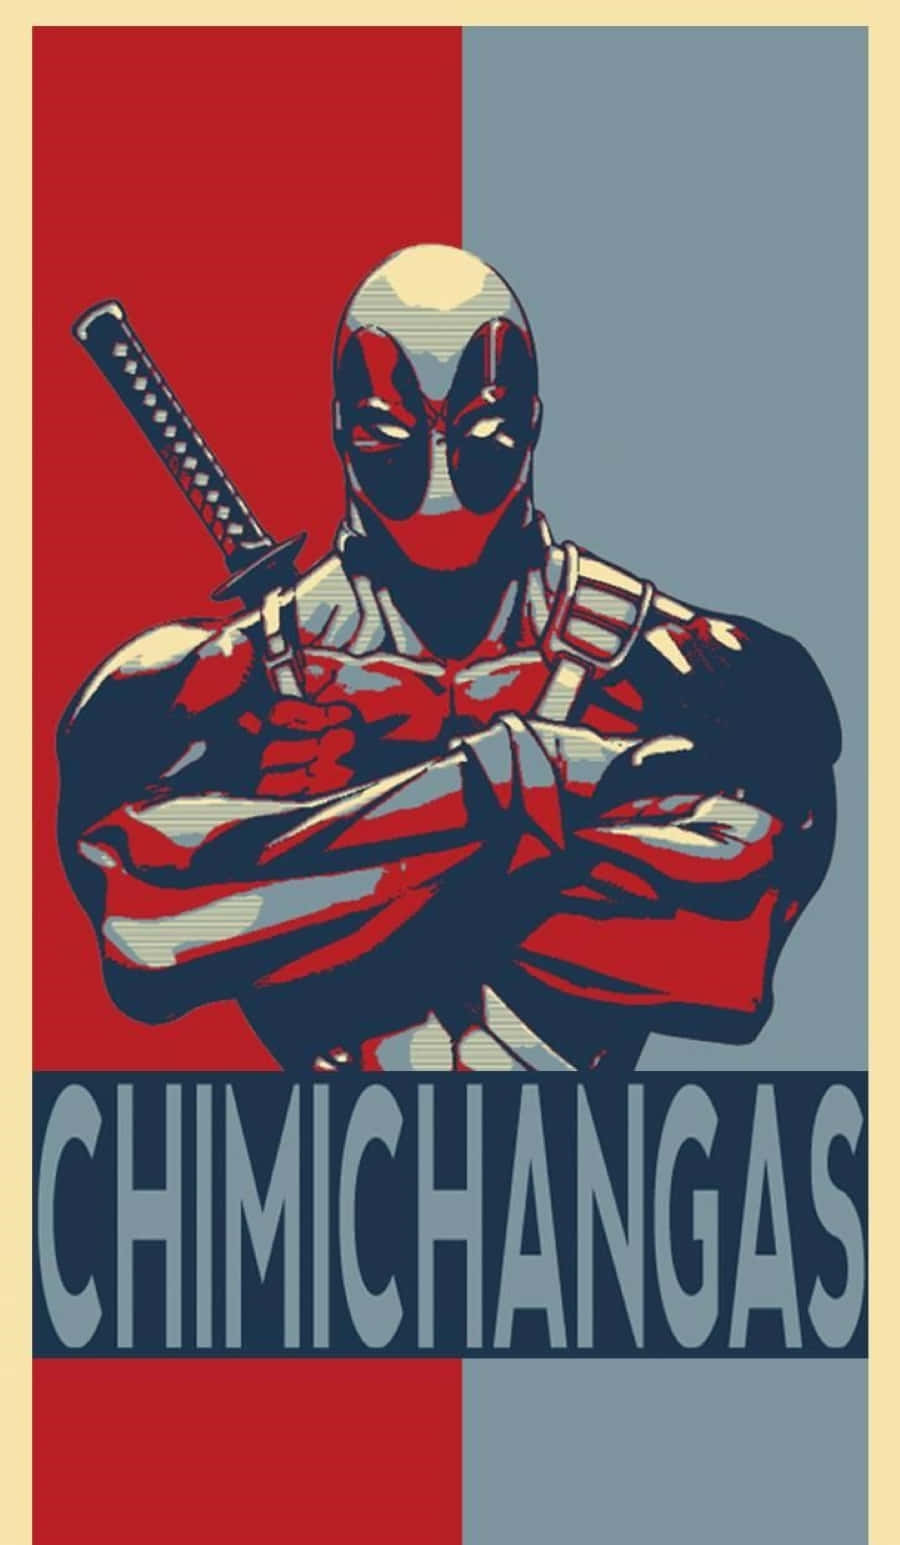 Delicious Homemade Chimichangas Wallpaper